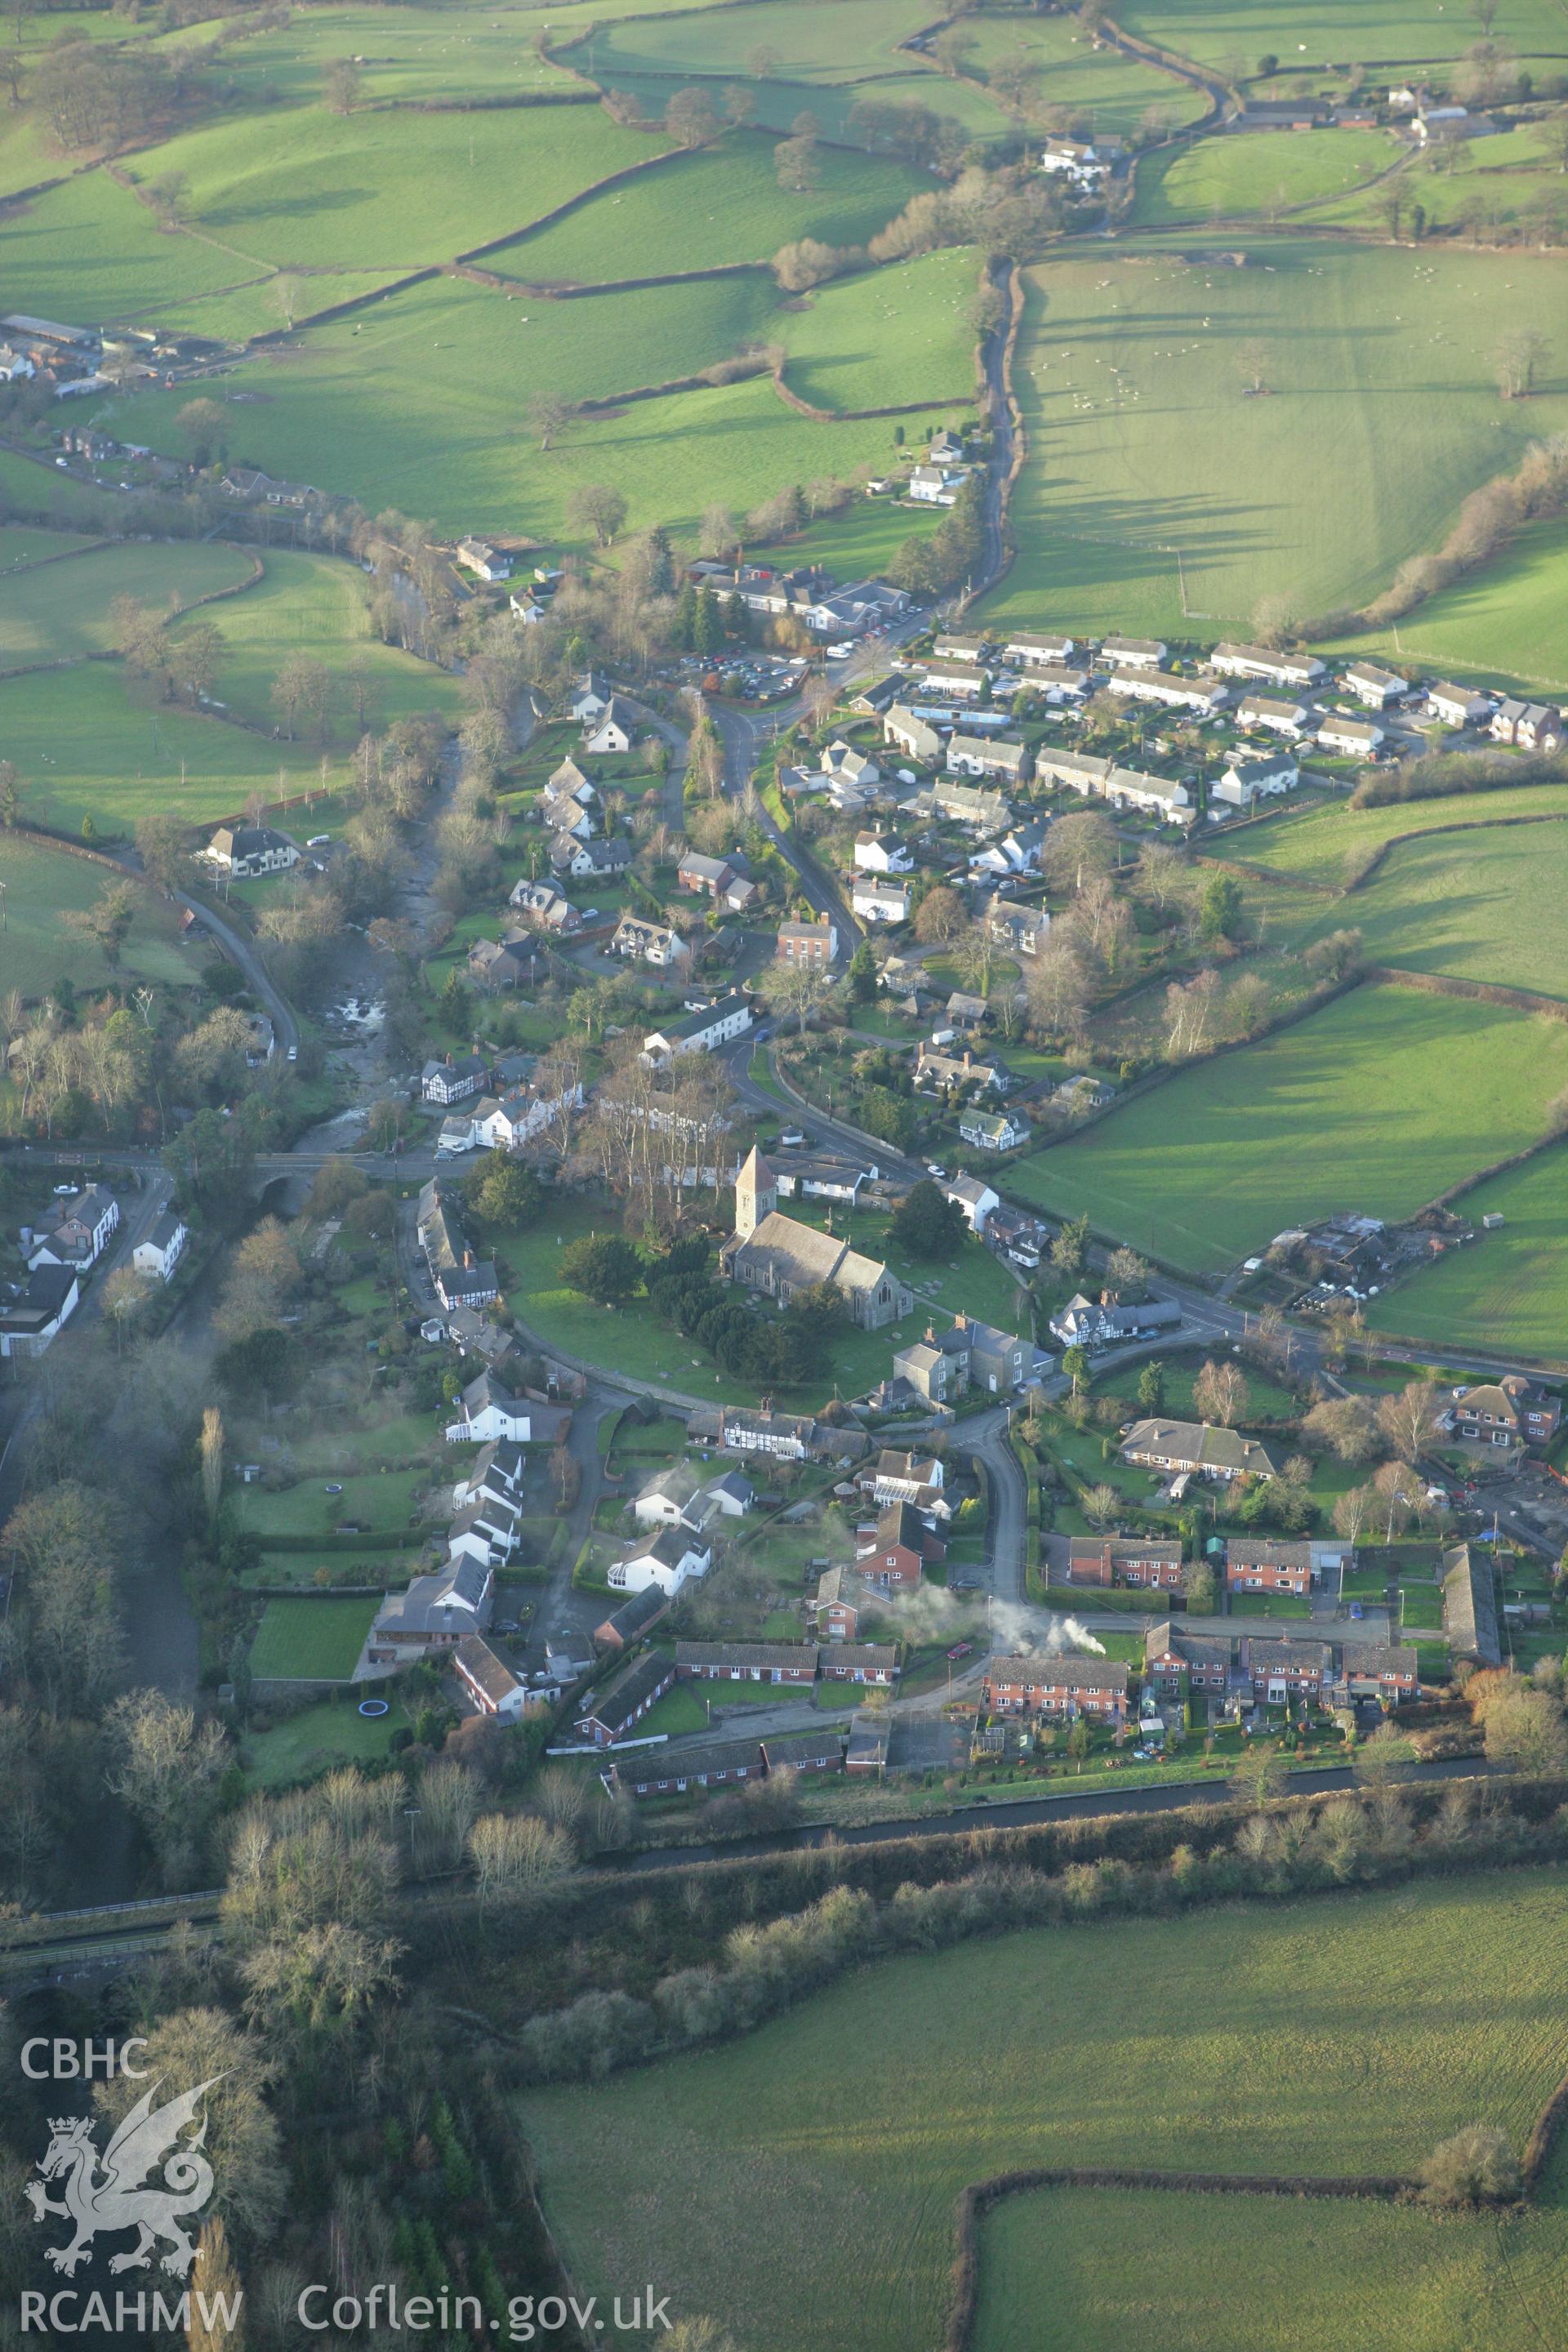 RCAHMW colour oblique photograph of Berriew, village. Taken by Toby Driver on 11/12/2007.